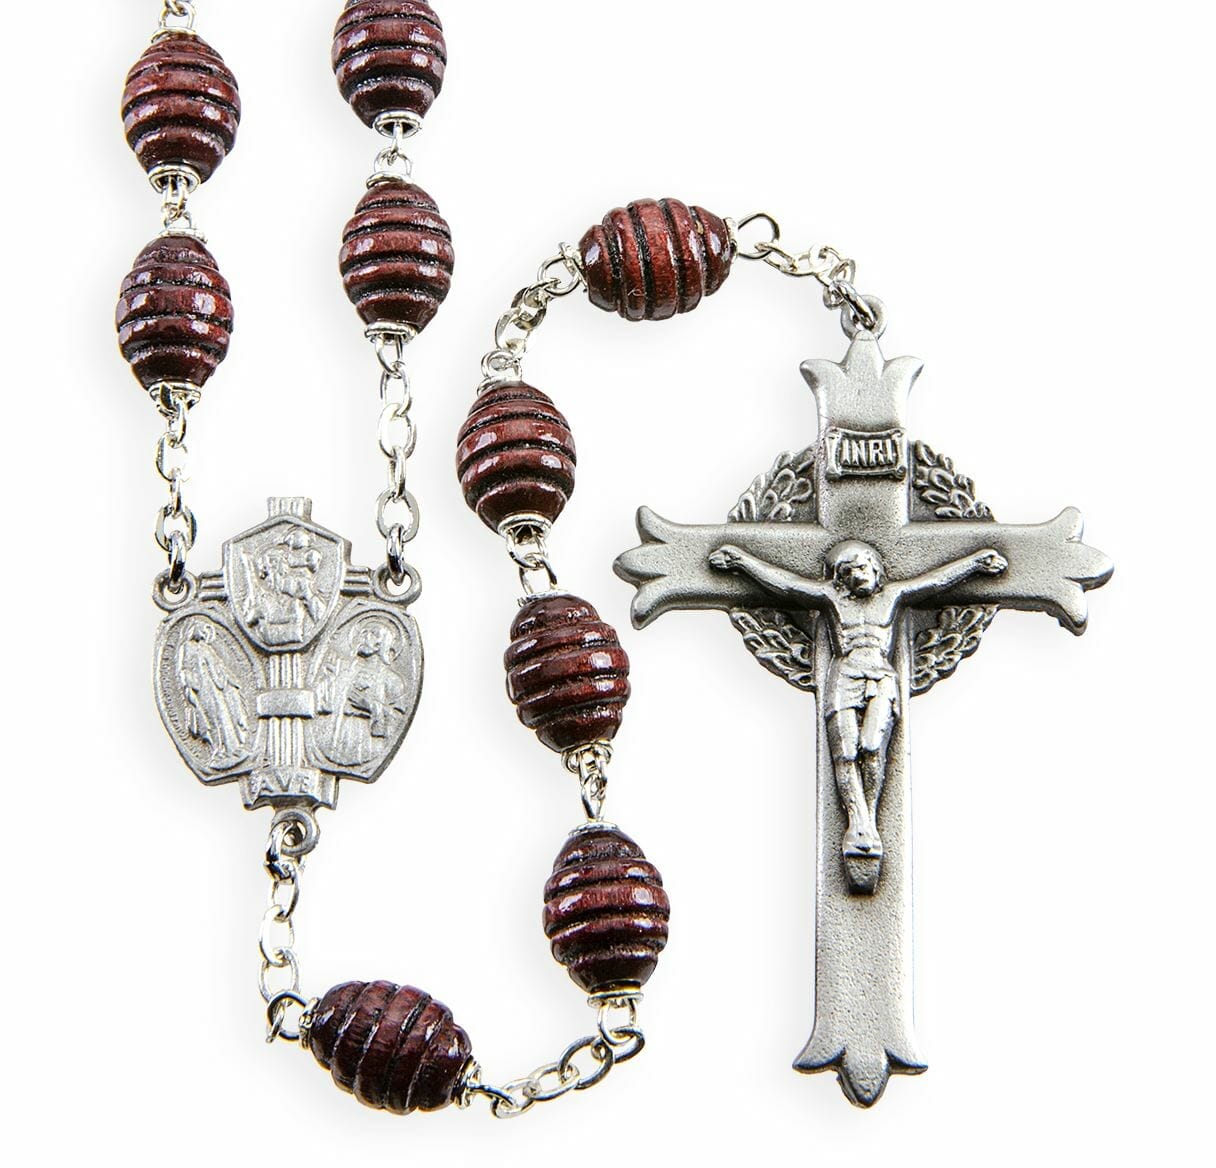 HMH Religious Floral Crucifix and Centerpiece Rosary Making Set